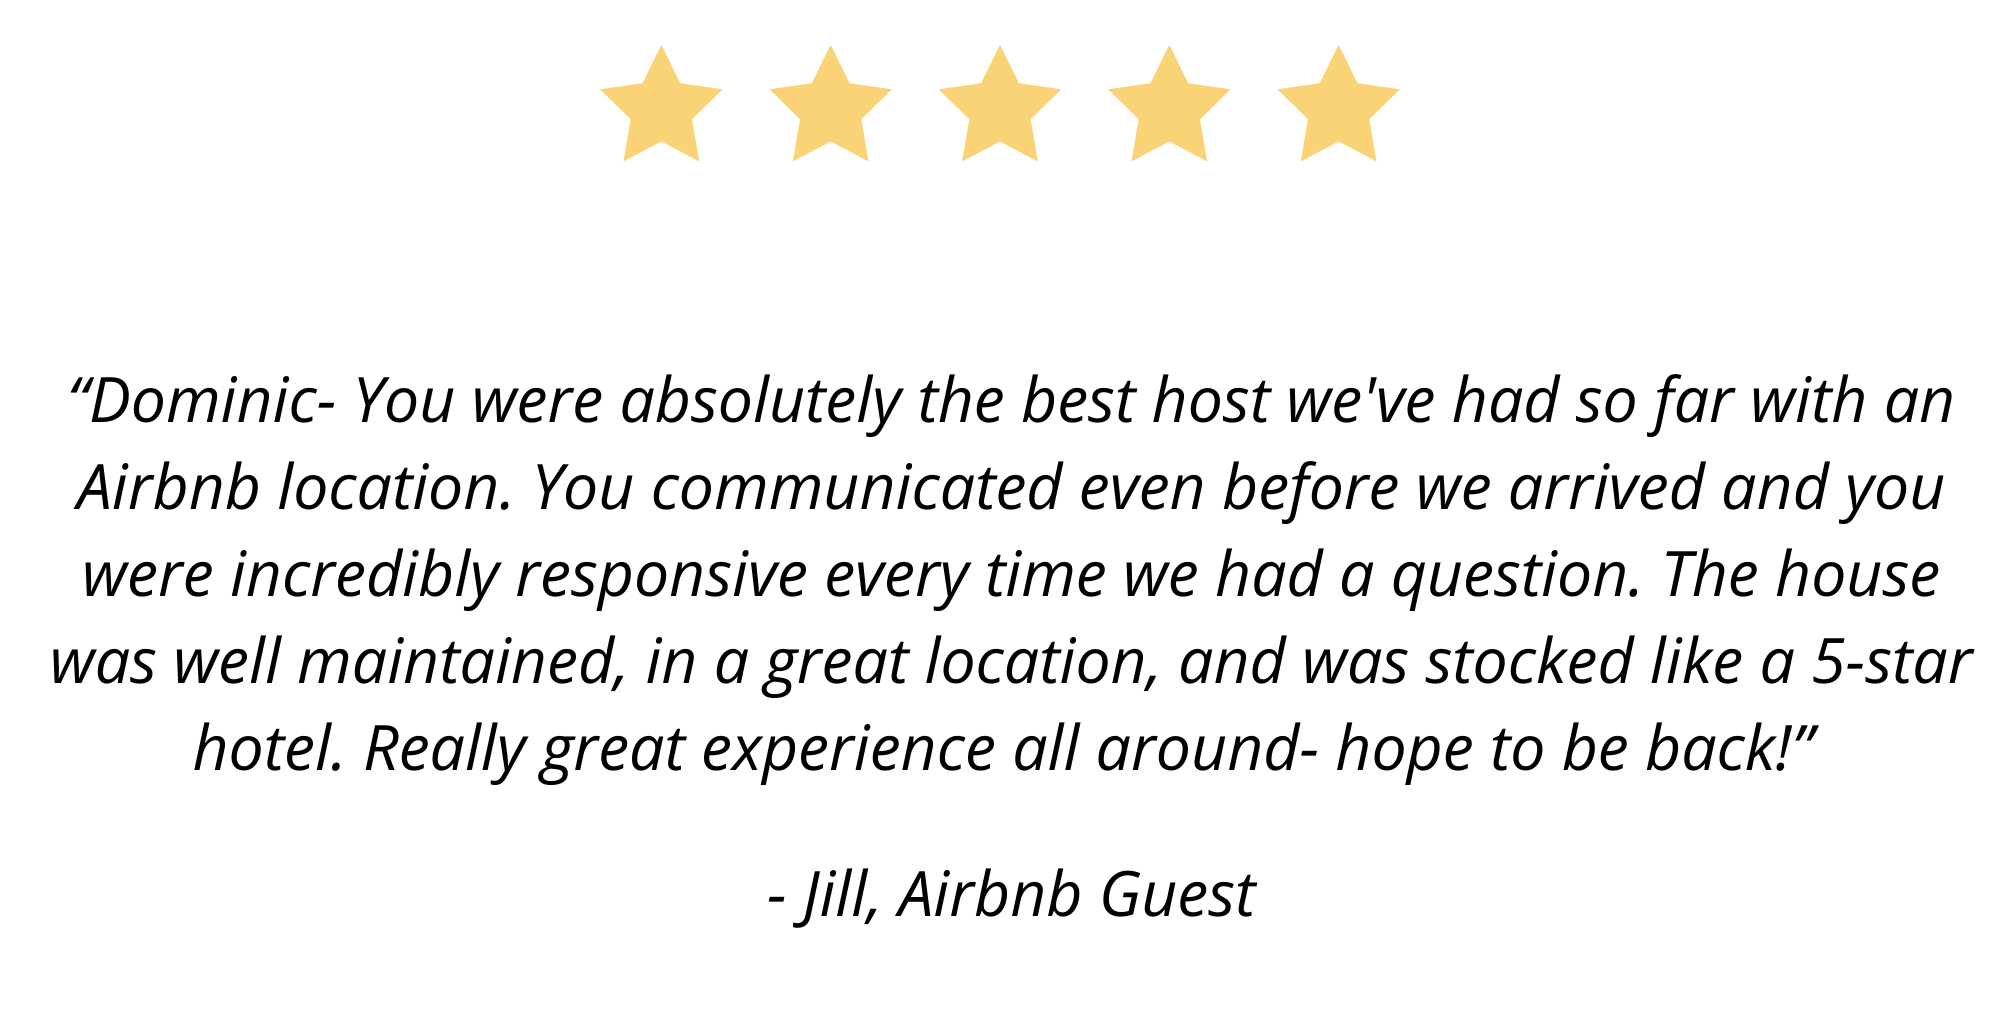 “Hi Dominic, Thanks for such a wonderful stay. We've completed the check-out steps and left the property now. You are the most attentive host we've ever had. We look forward to our next stay with you.” – Sei, Airbn.png